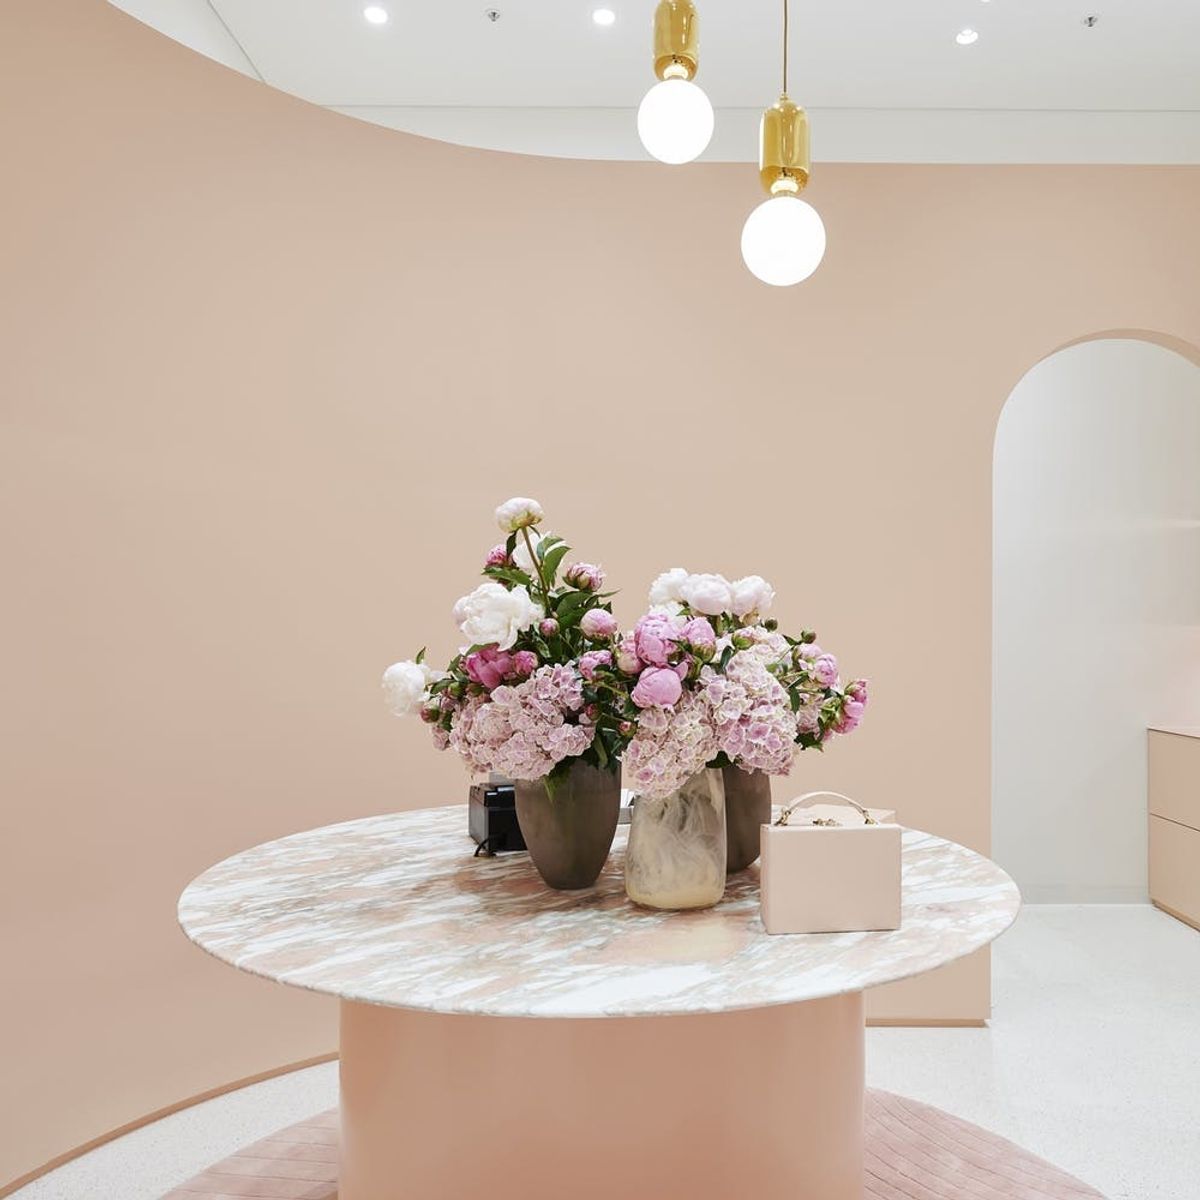 This Rose-Hued Store Is Our Millennial Pink Crush